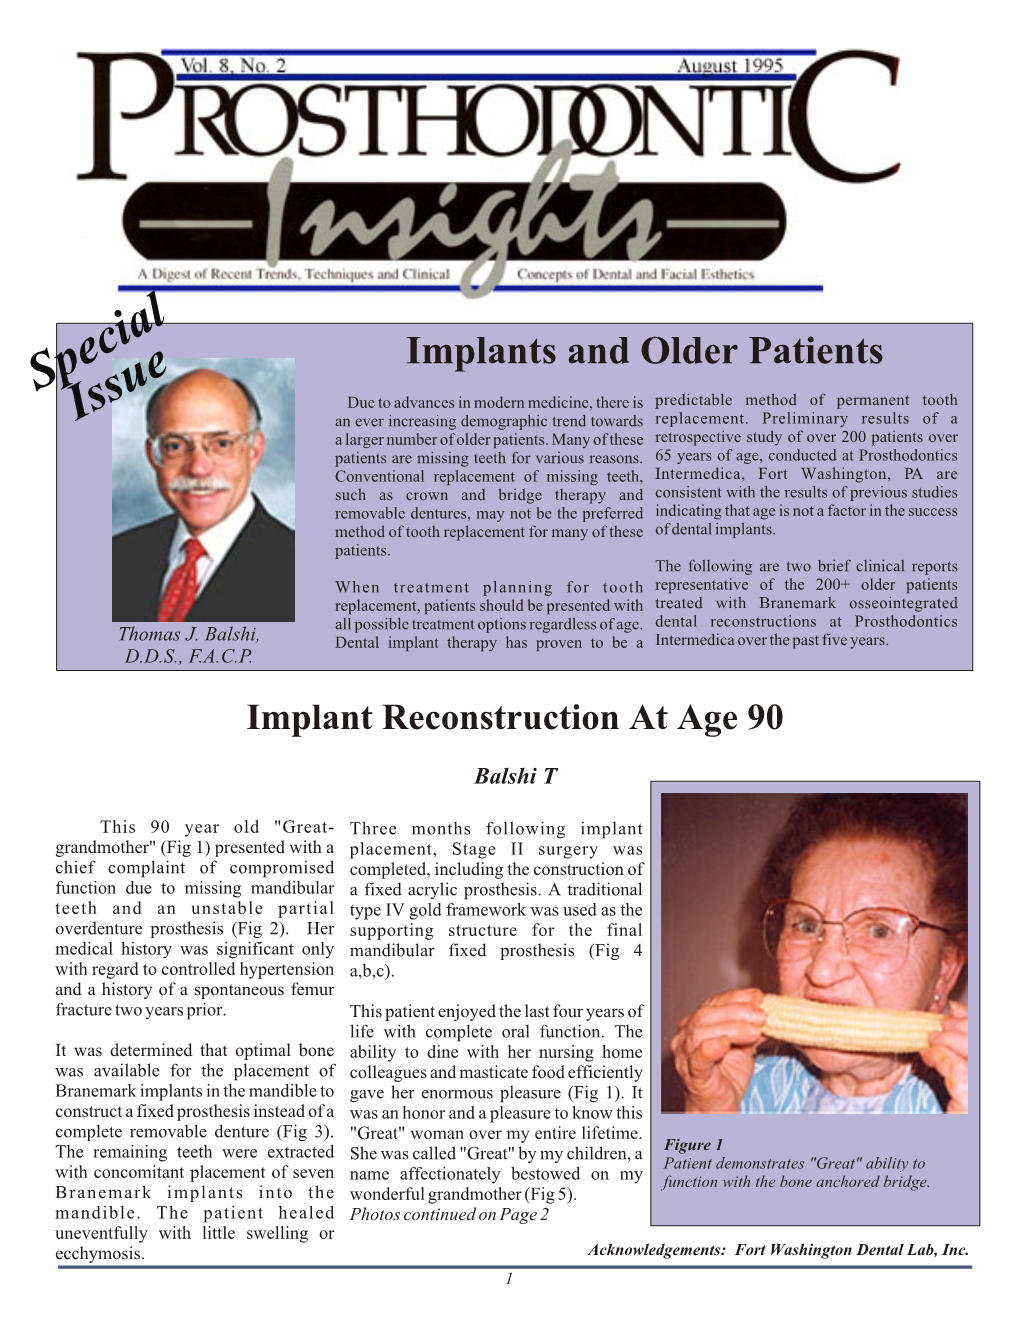 Implants and Older Patients